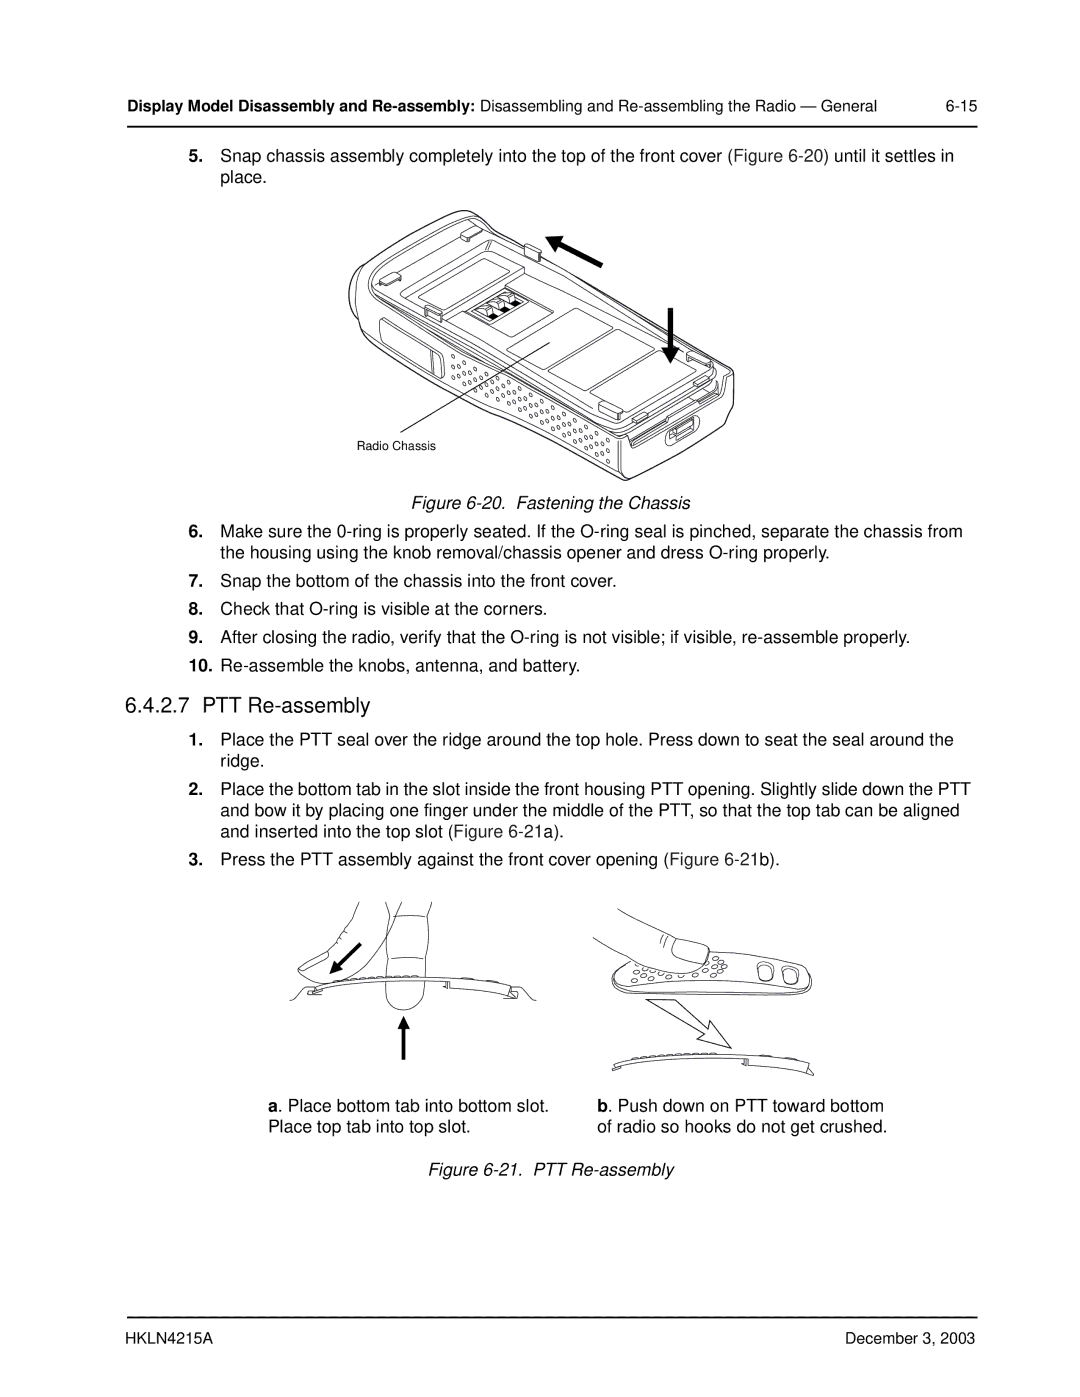 Motorola EP450 service manual PTT Re-assembly, Fastening the Chassis 